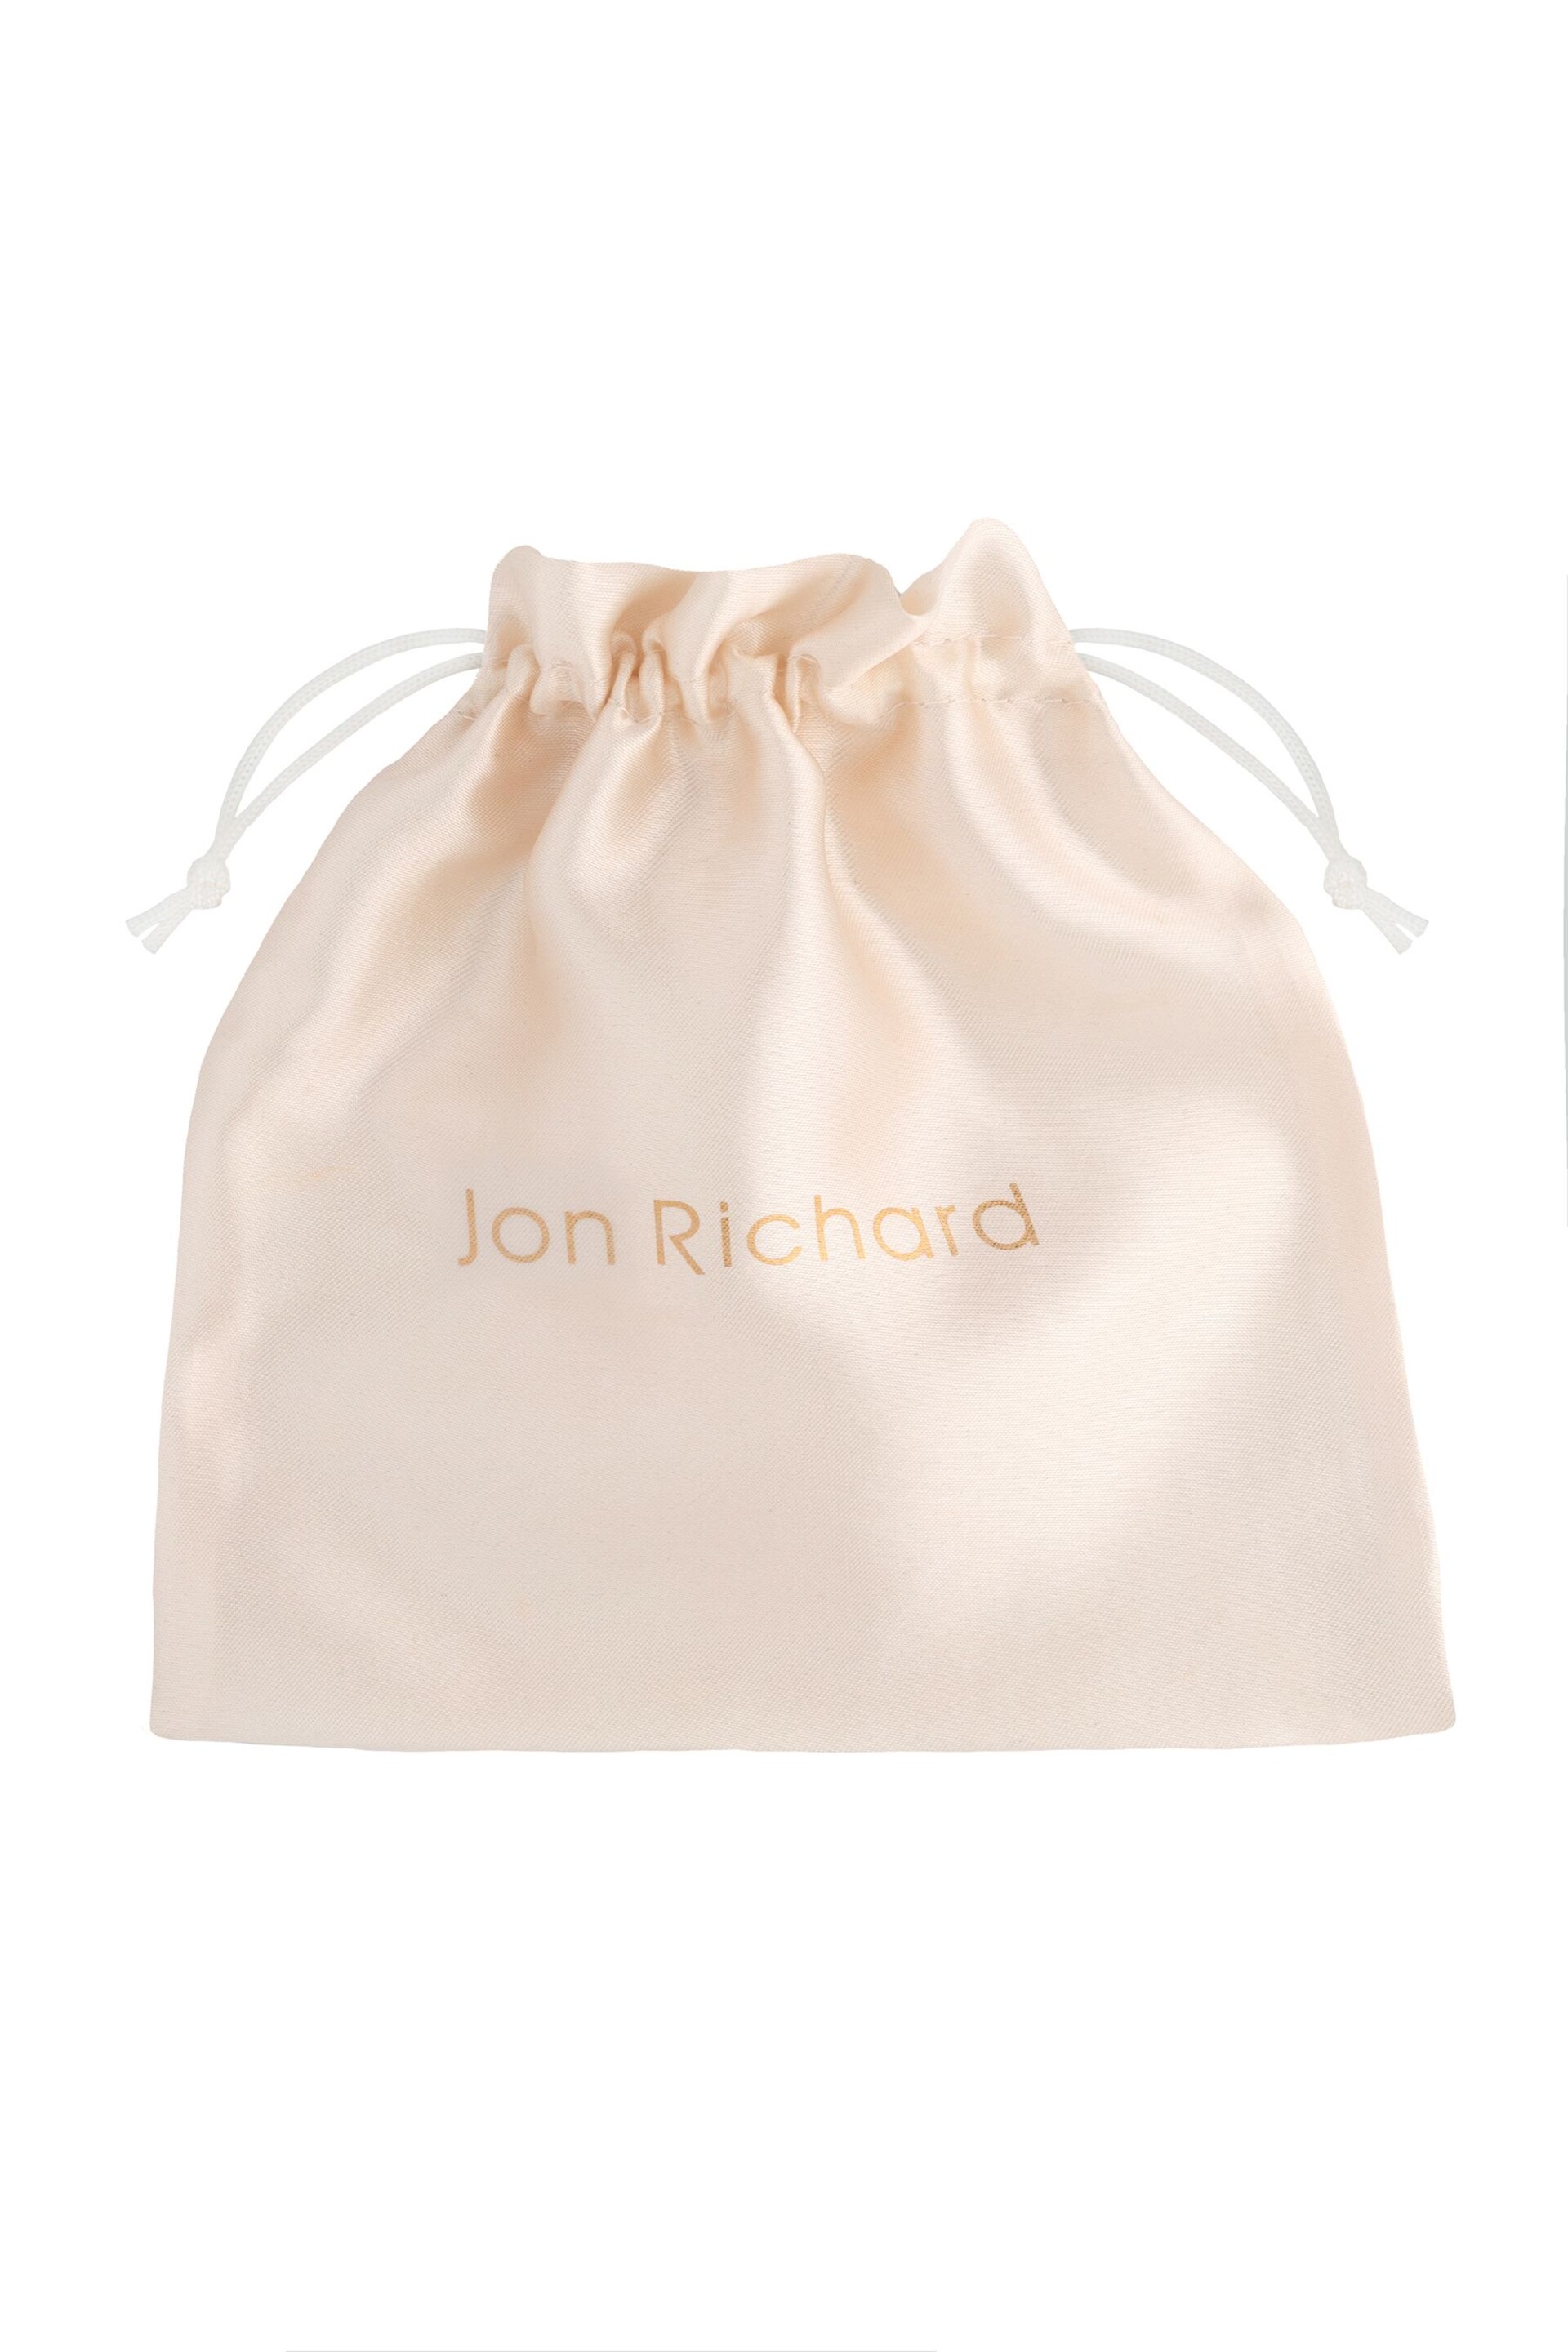 Jon Richard Silver Tone Radiance Collection Gift Pouch Crystal Tiara - Image 3 of 3